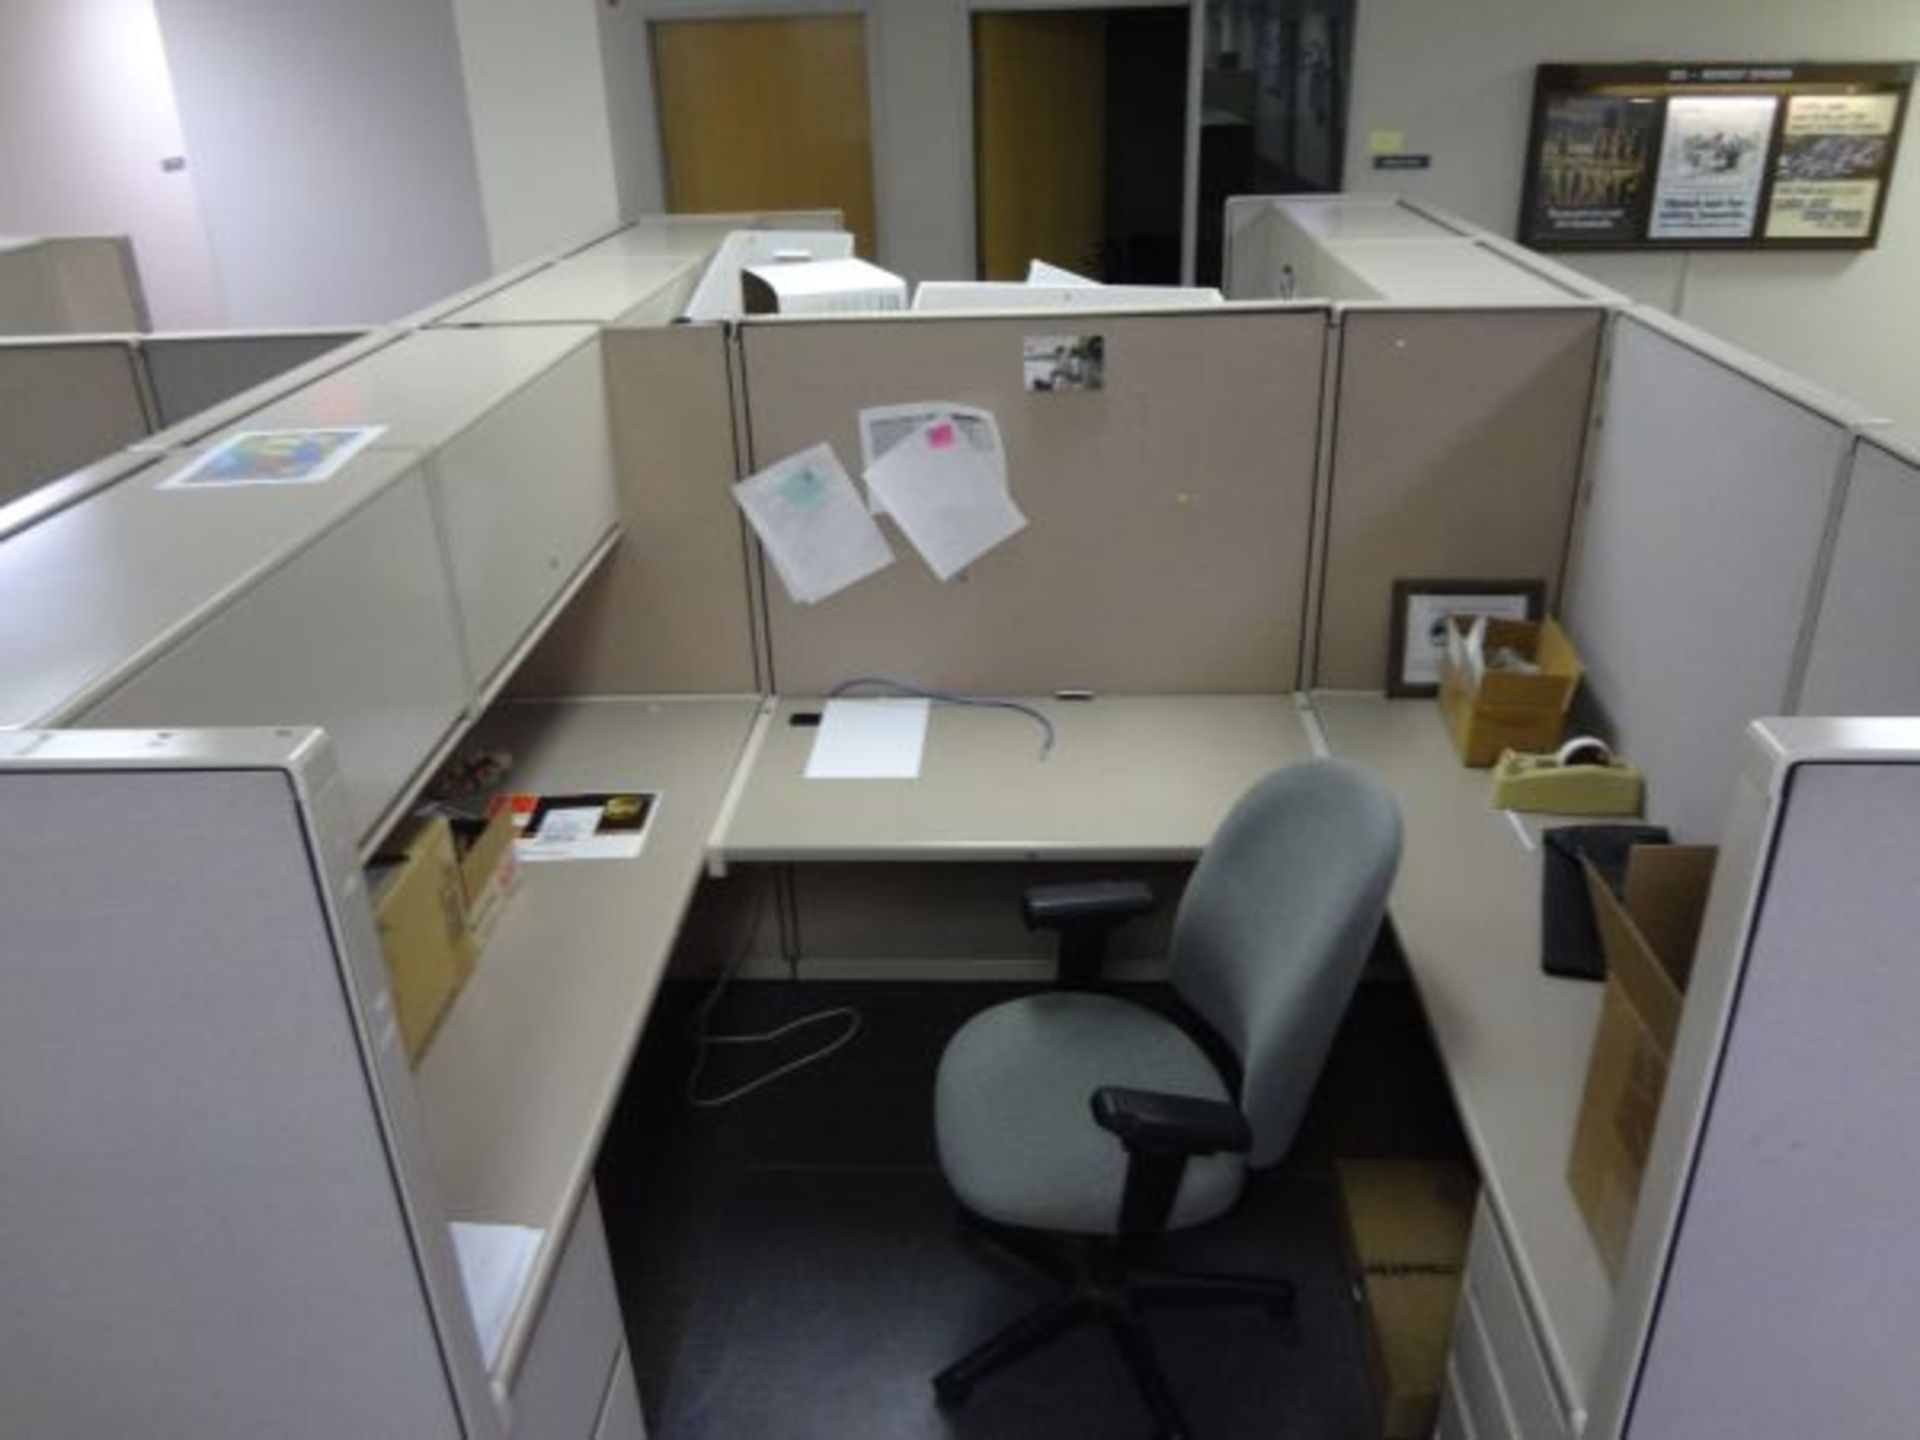 (LOT) 75" X 98" X 61" FOUR-PERSON STEELCASE MODULAR OFFICE INCLUDING (2) OVERHEAD CABINETS, (1) 3- - Image 2 of 5